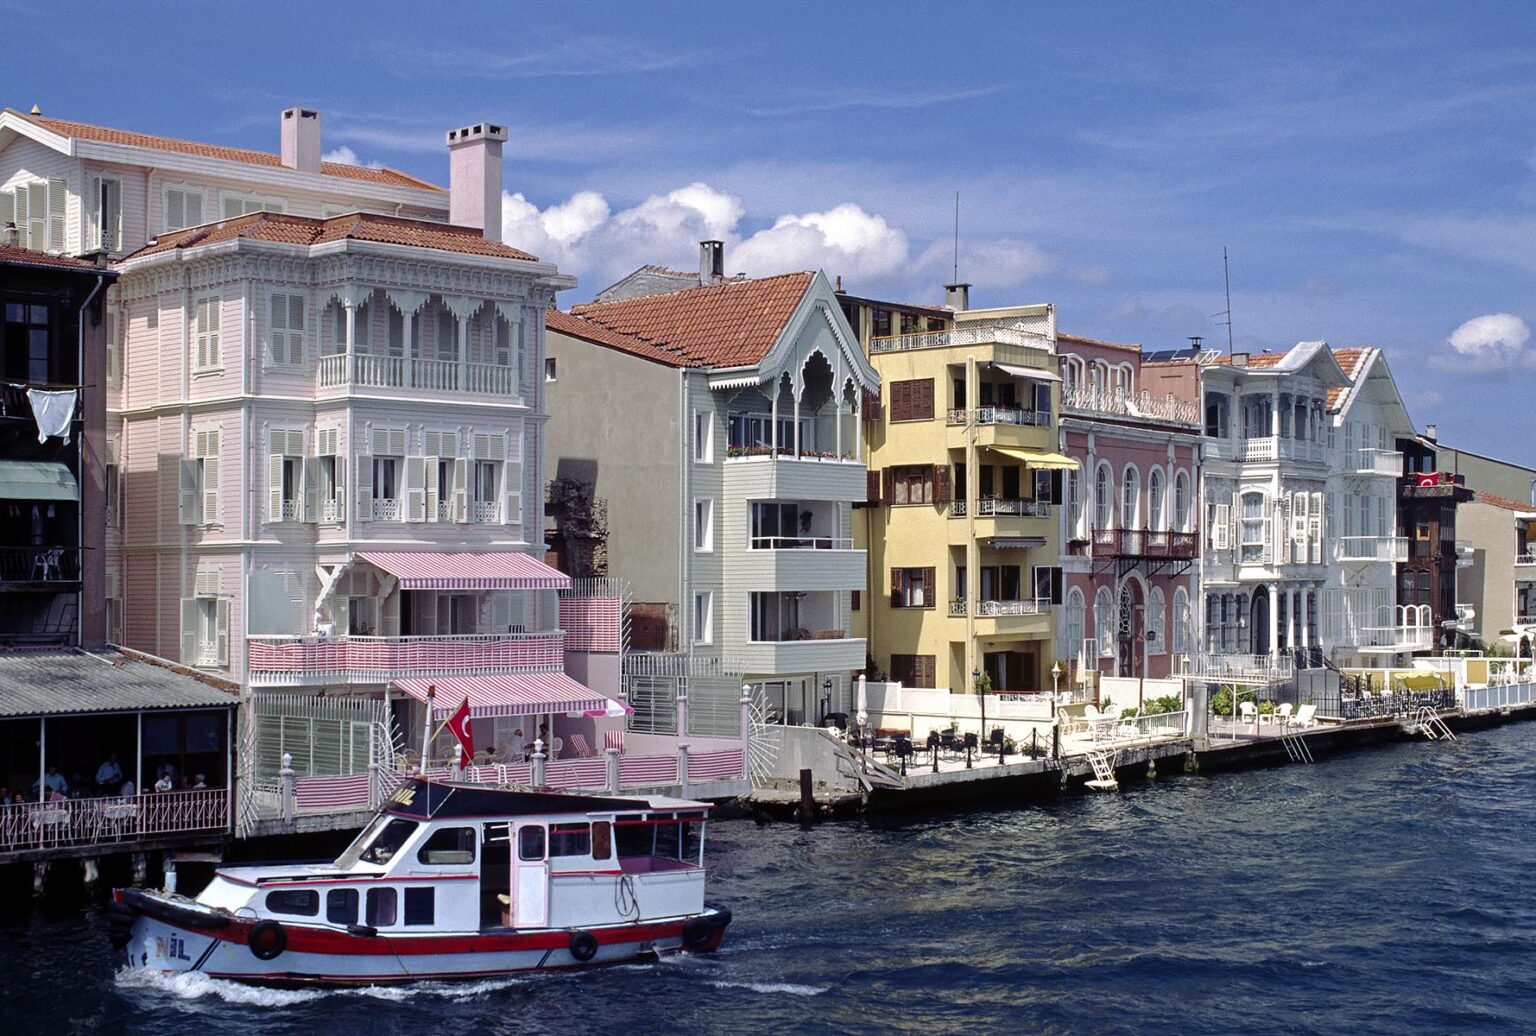 Luxury homes line the shore of  the BOSPHORUS (the waterway which joins the Mediterranean and the Black Sea) - Istanbul, turkey